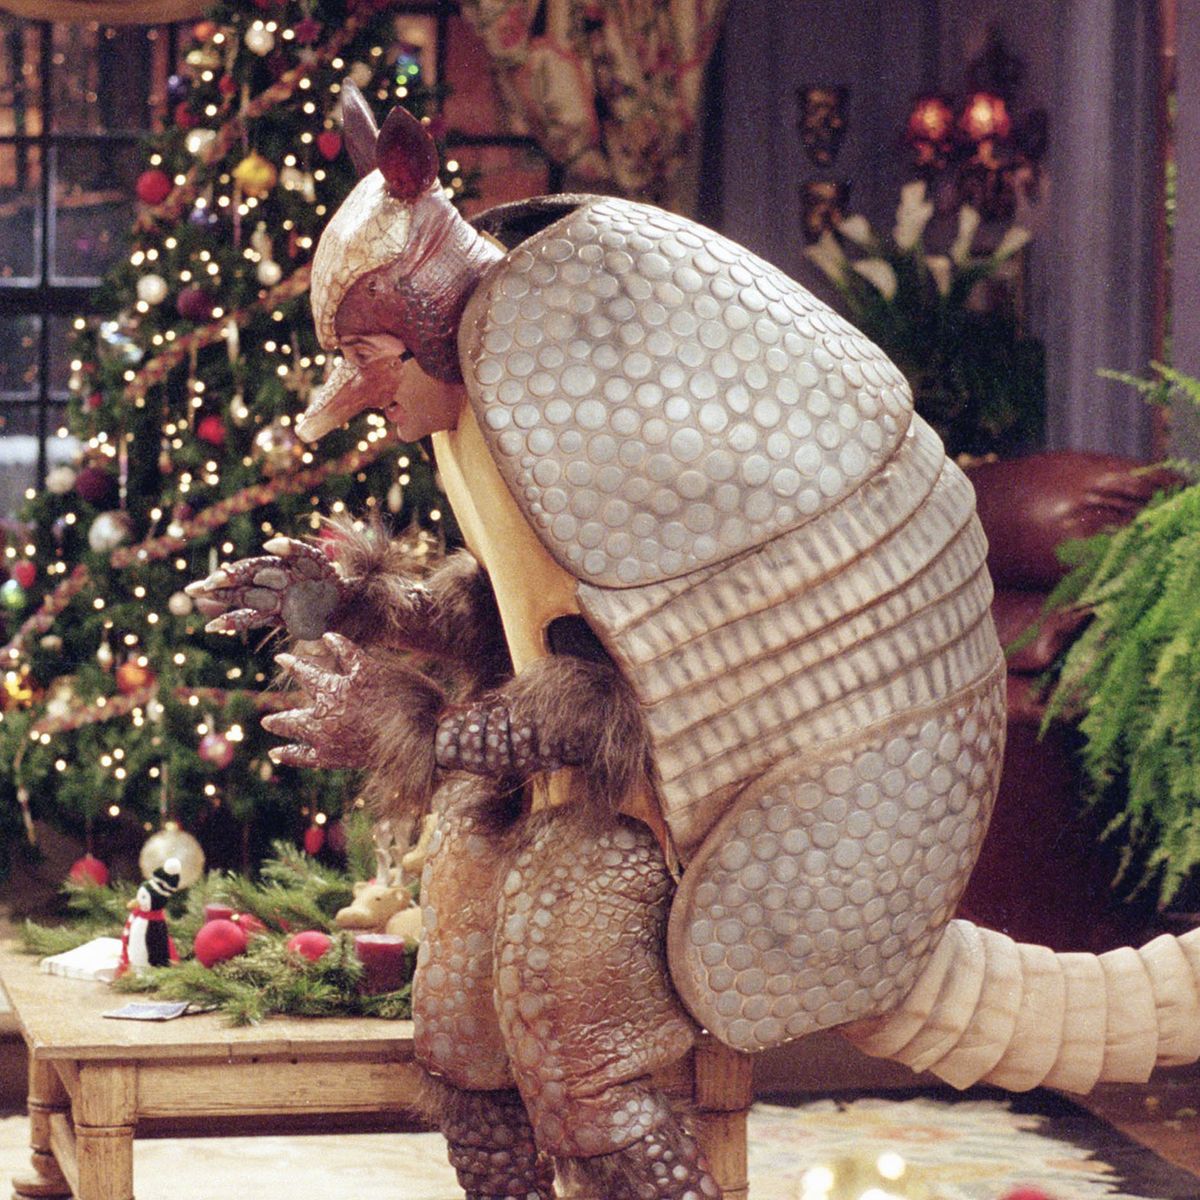 Friends' Christmas Episodes, Ranked